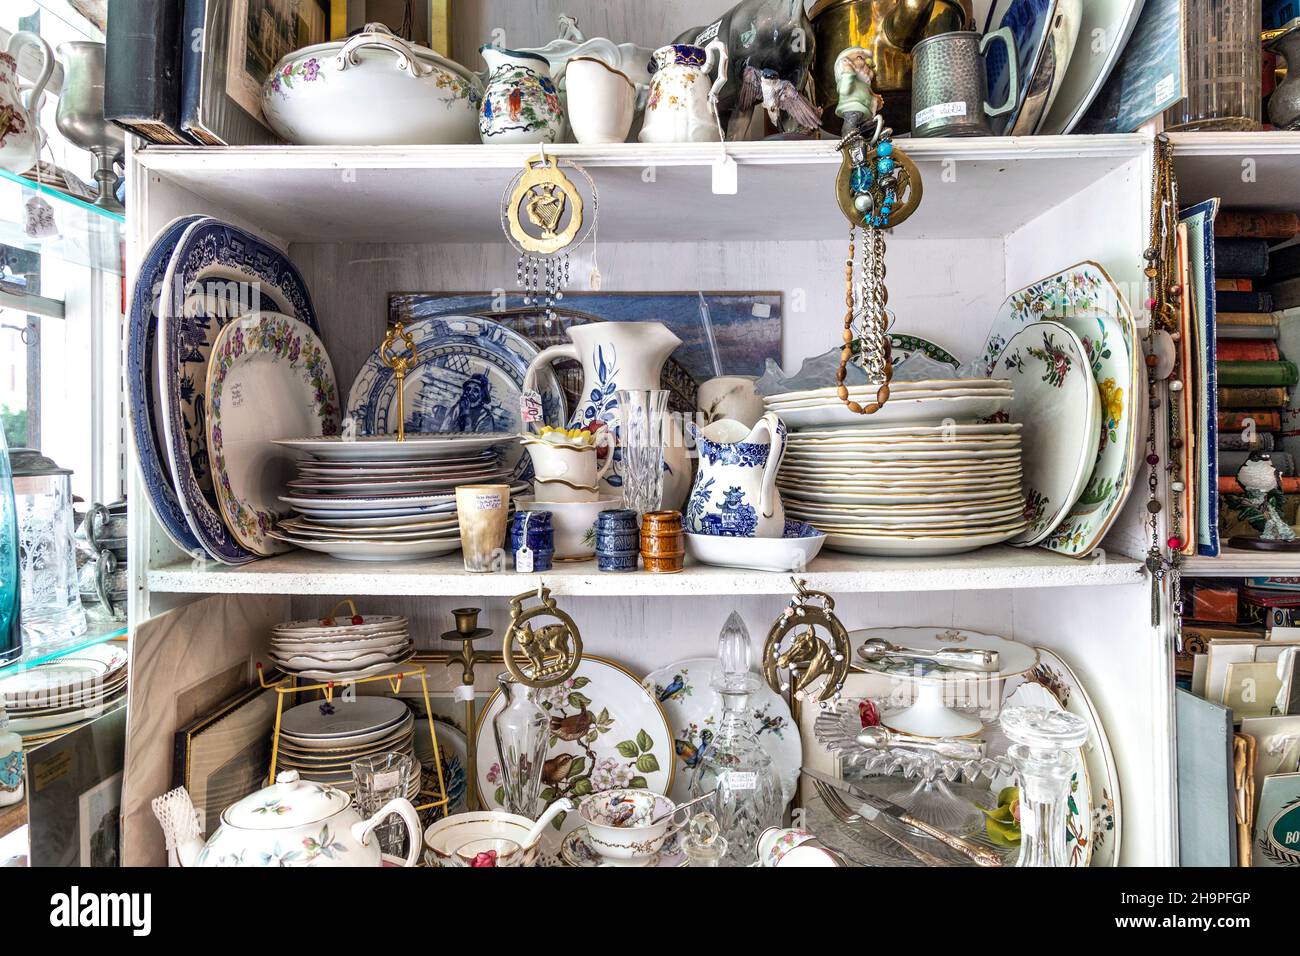 Shelf with selection of crockery, tableware and porcelain on display at an antique shop (Hampton Court Emporium, East Molesey, UK) Stock Photo